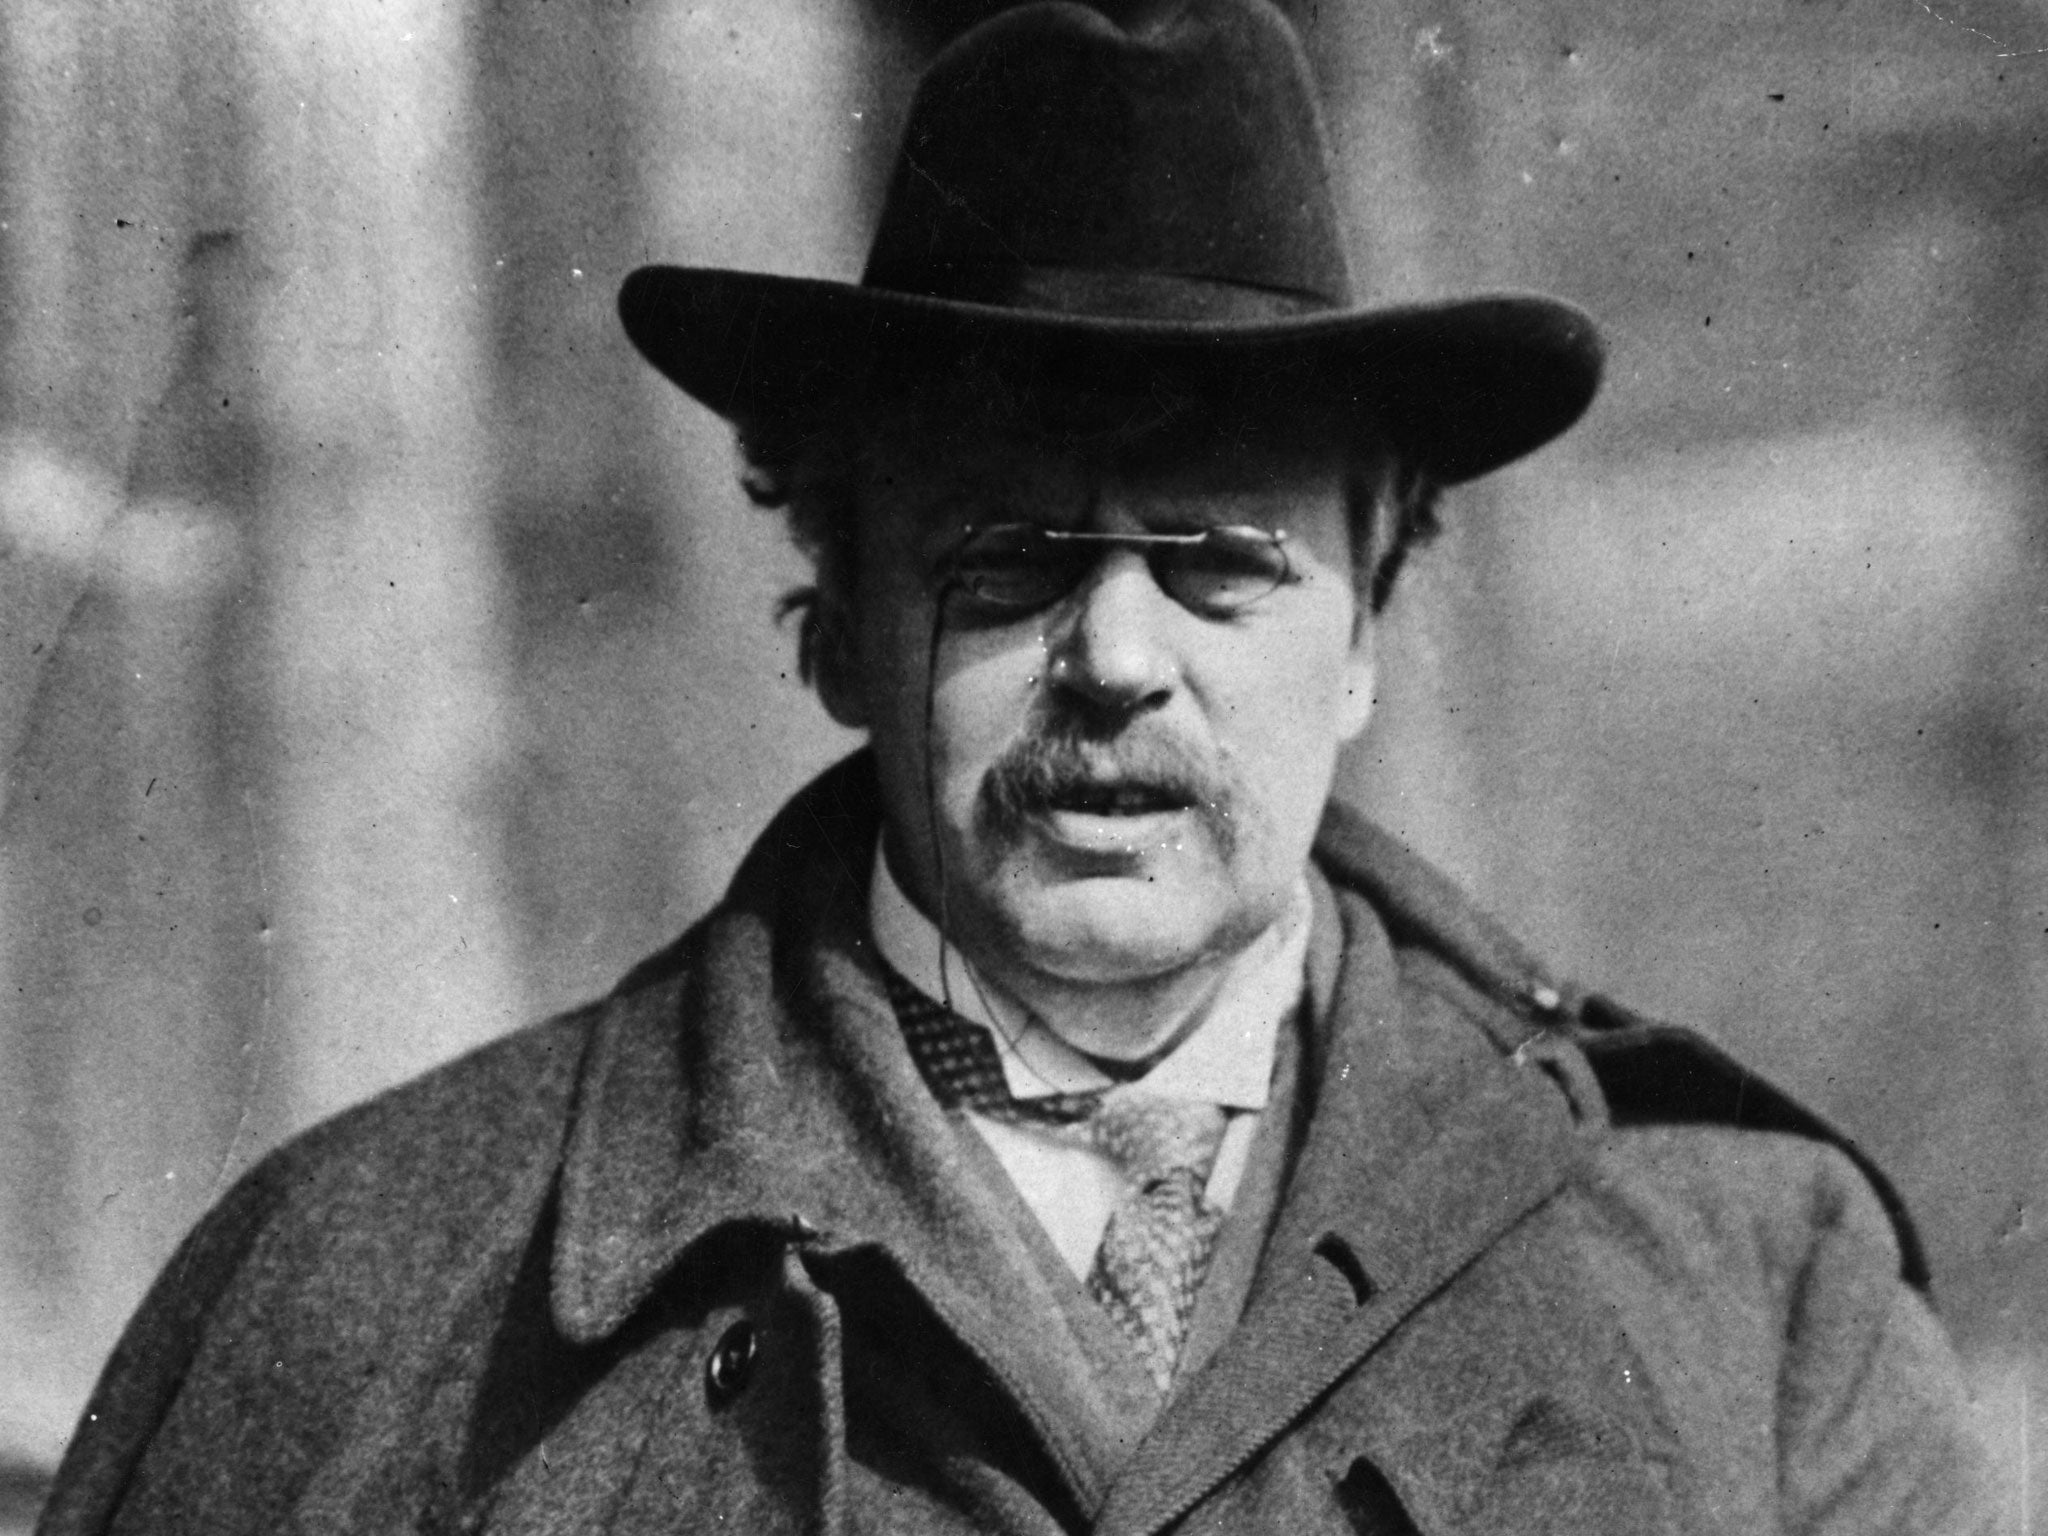 GK Chesterton: He converted to Catholicism in the 1920s and wrote several religious works